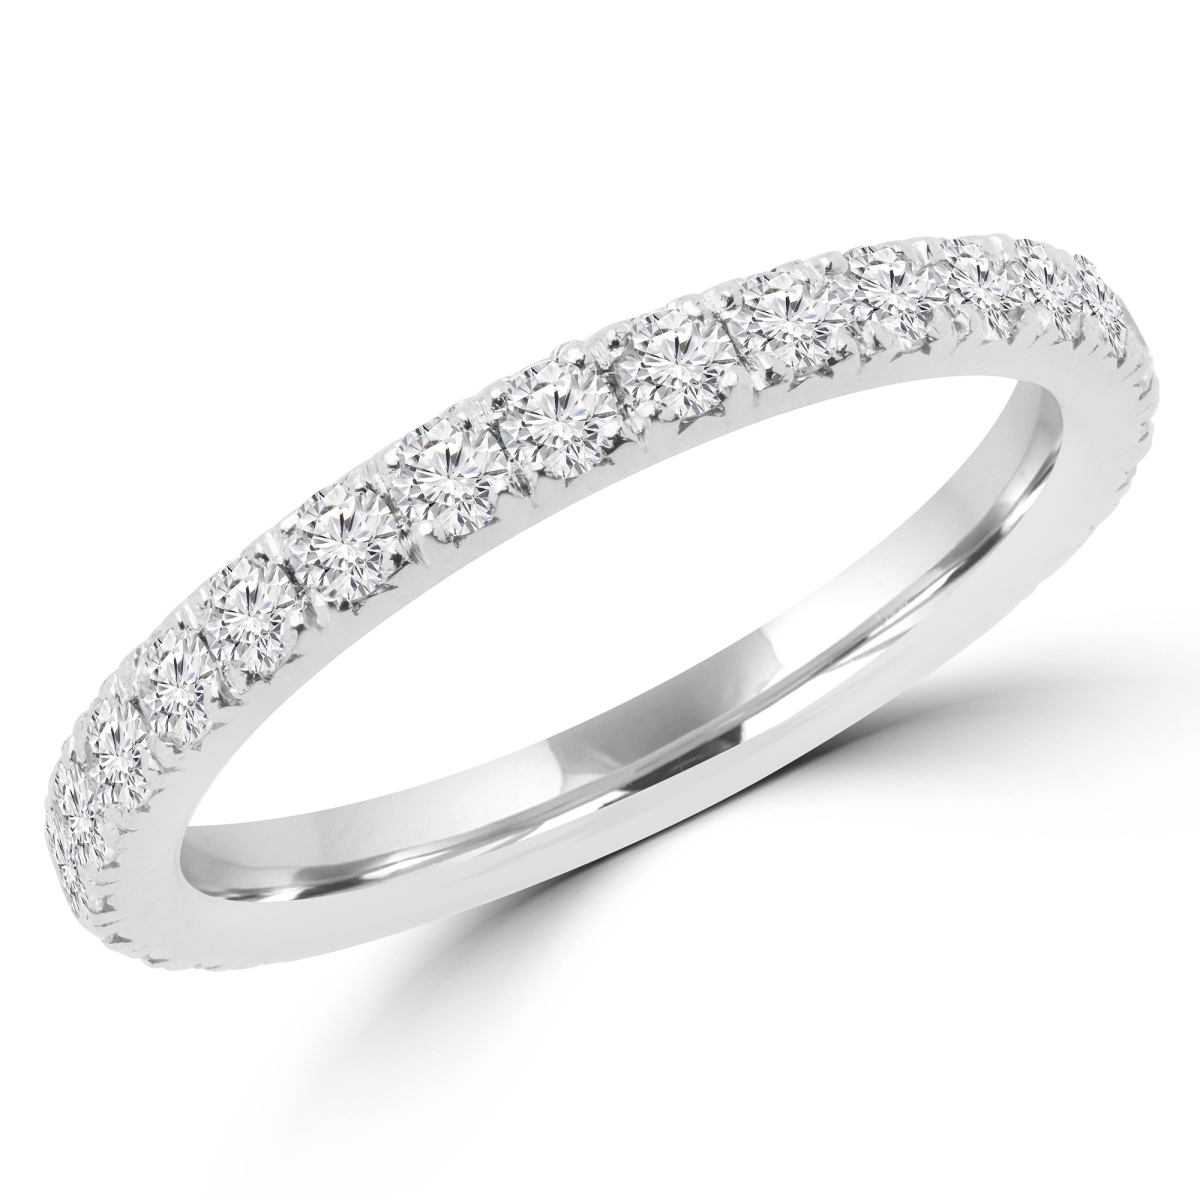 Picture of Majesty Diamonds MD170308-8 0.66 CTW Round Diamond Semi-Eternity Wedding Band Ring in 14K White Gold - Size 8